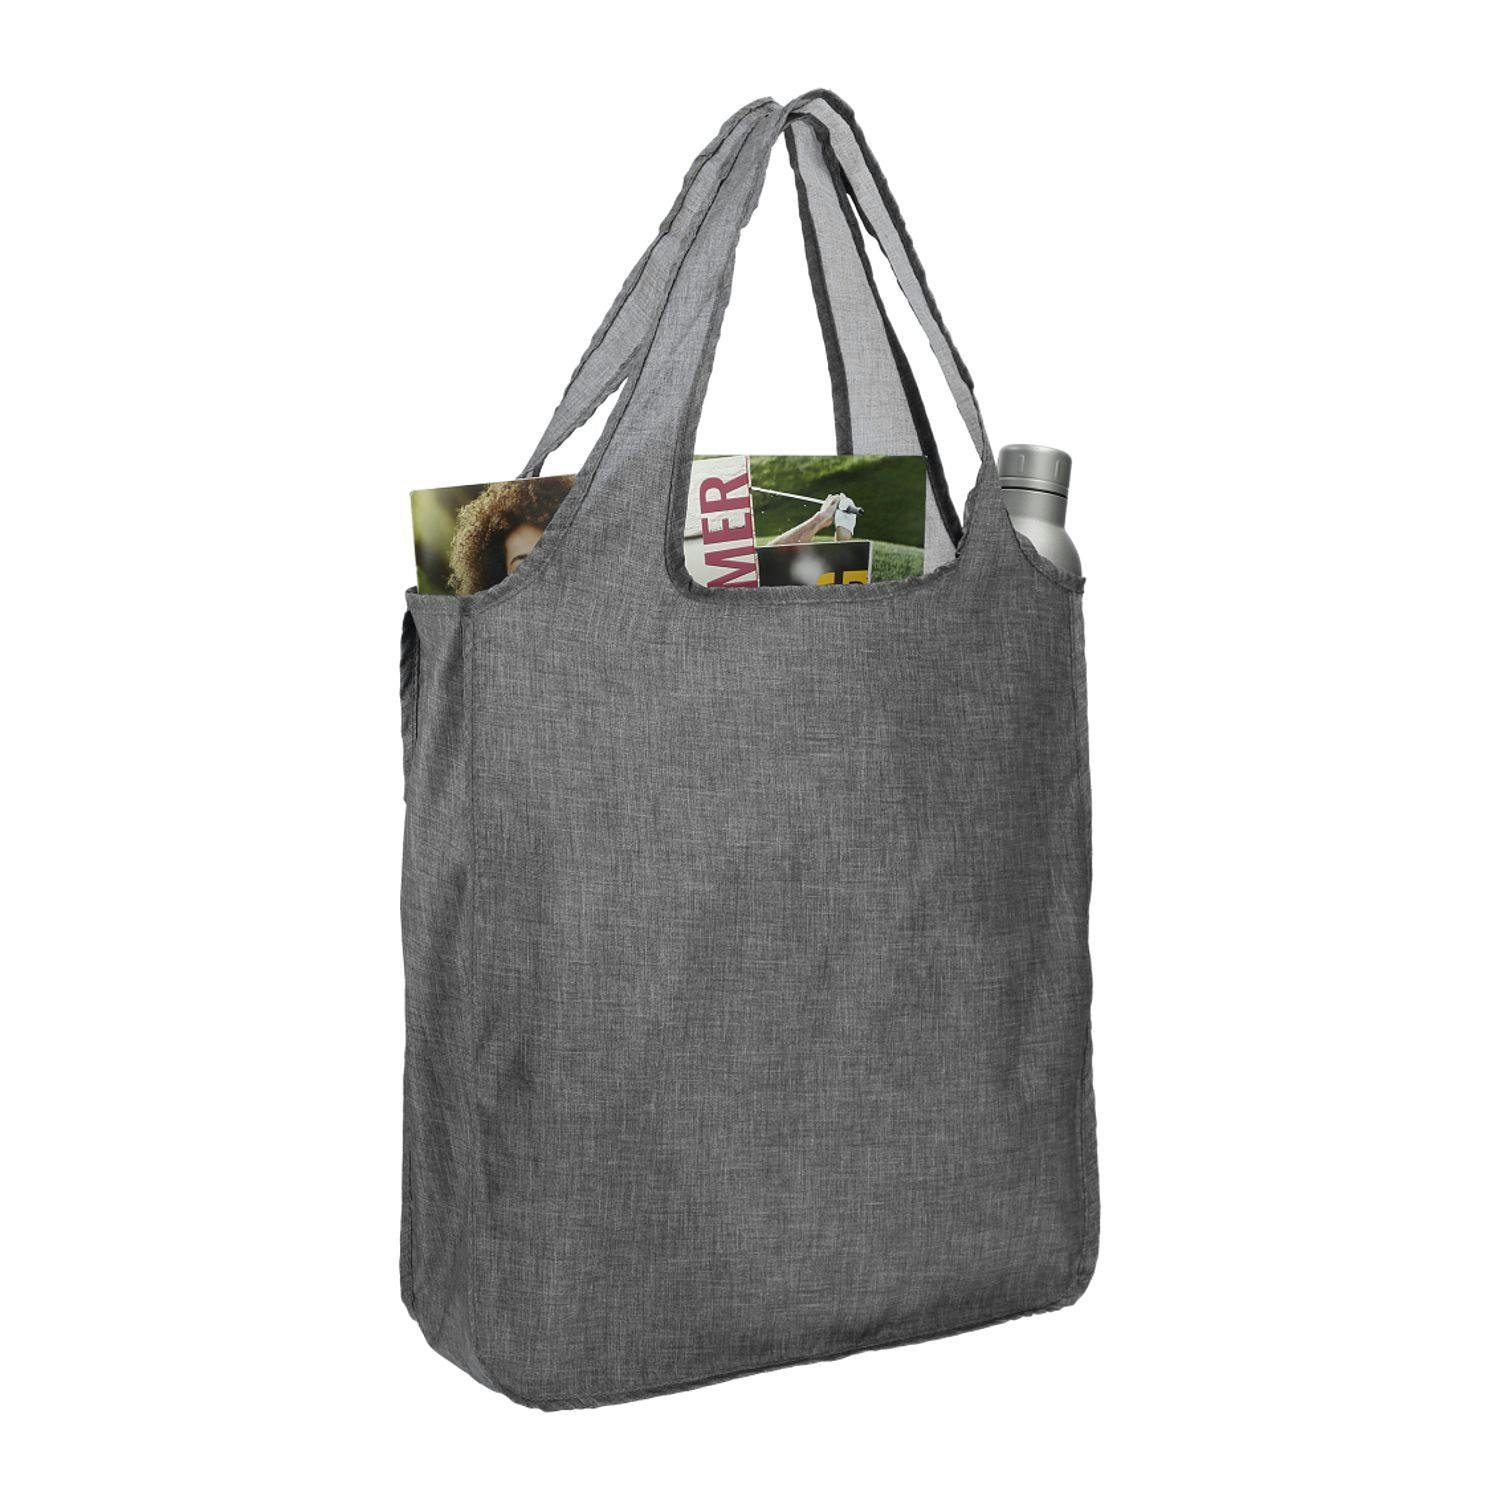 Ash Recycled Large Shopper Tote - additional Image 3